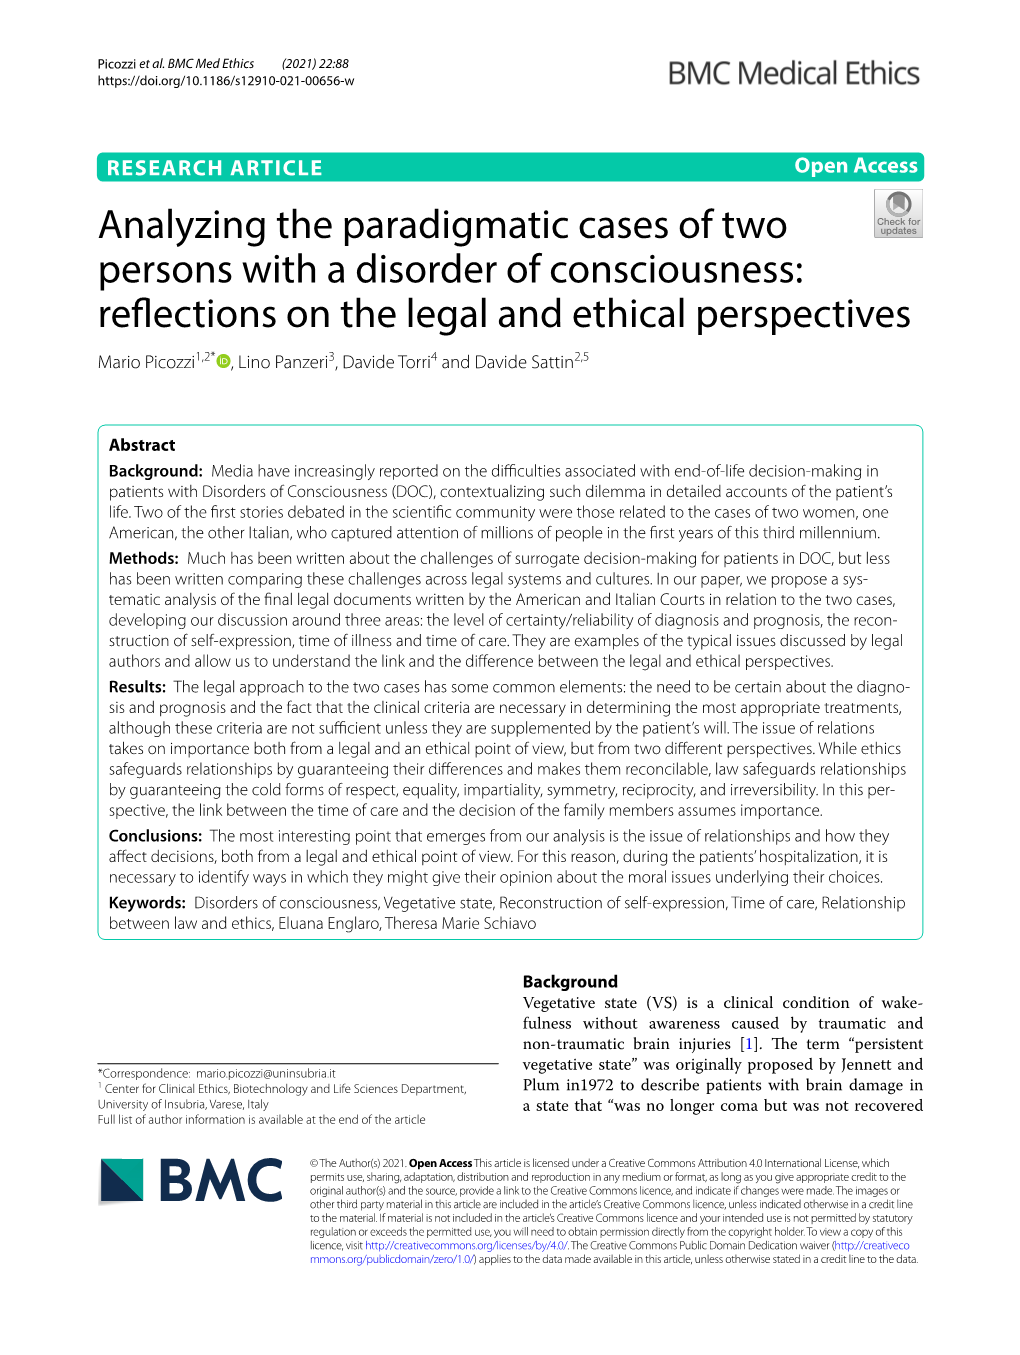 Analyzing the Paradigmatic Cases of Two Persons